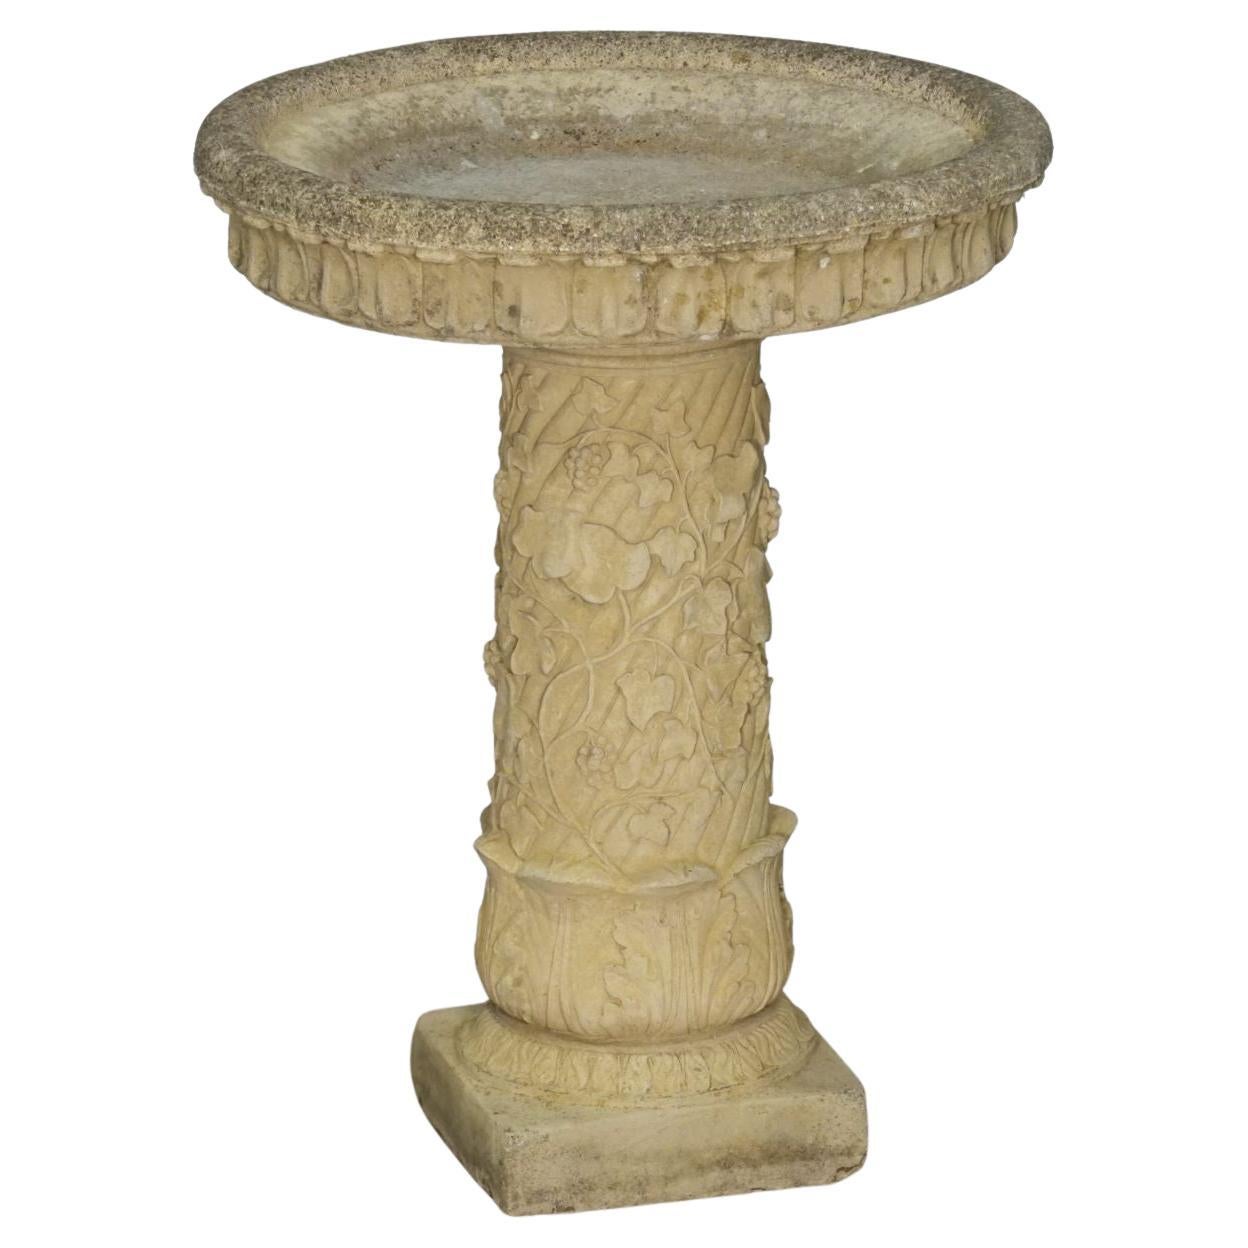  Large English Garden Stone Bird Bath with Faux Ivy Relief